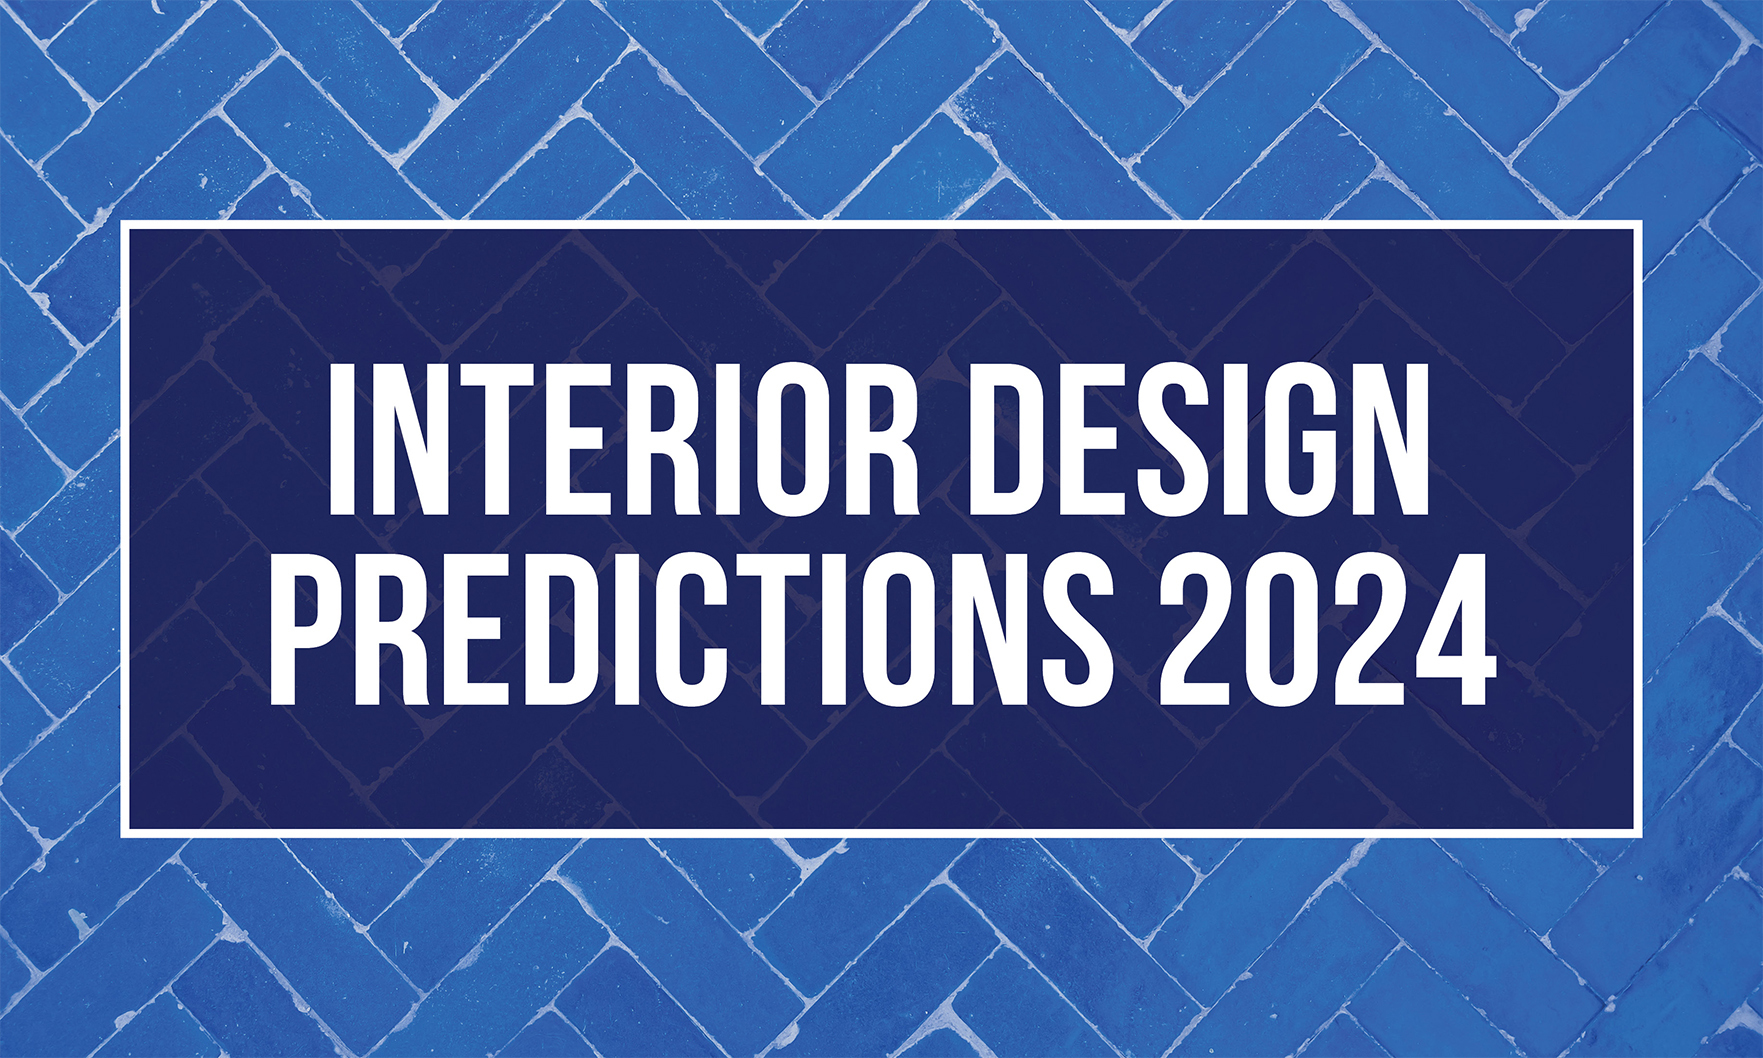 Houzz predicts that these interior design trends will take over in 2024